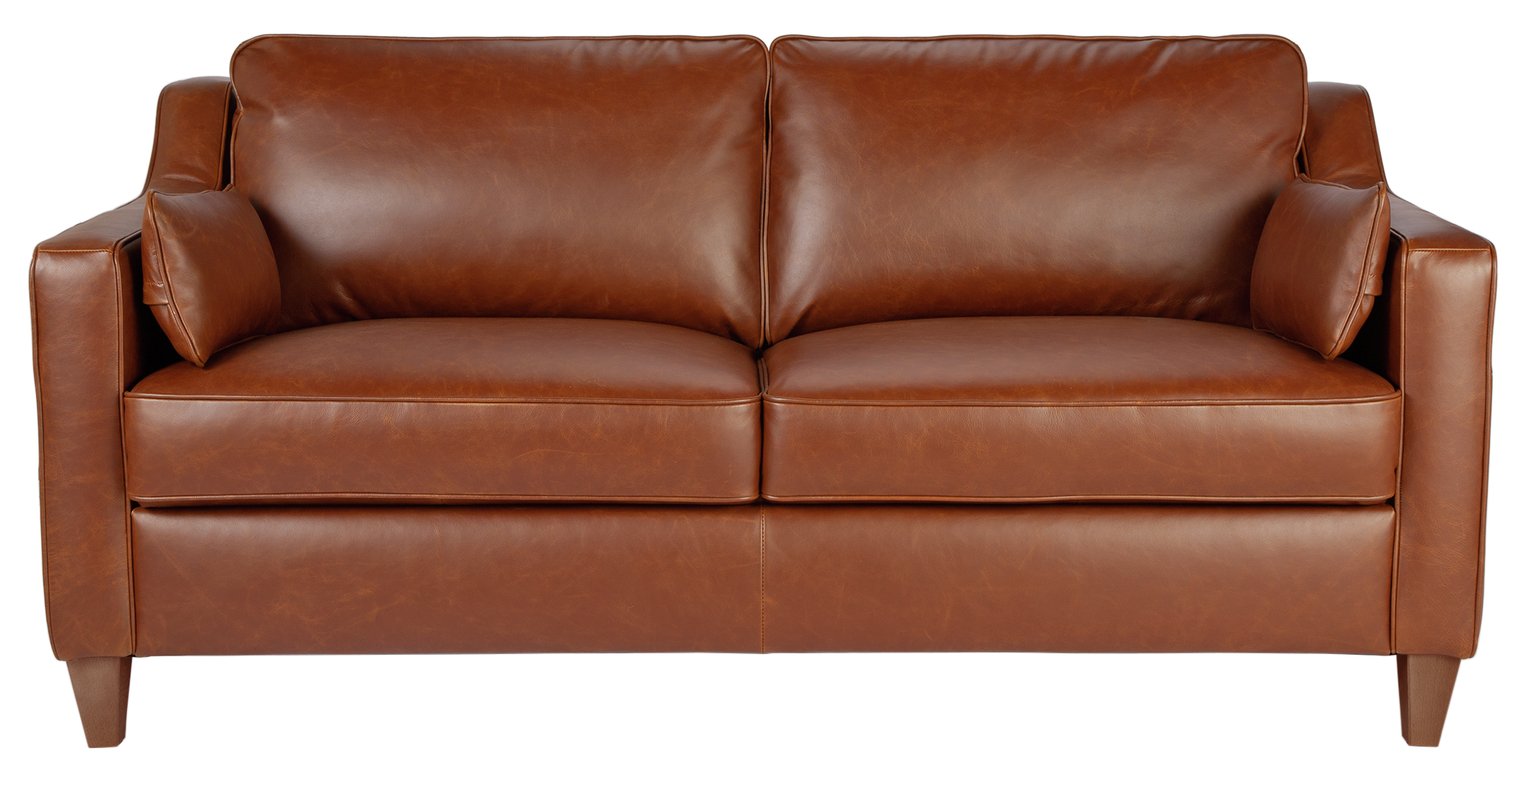 casa leather sofa review